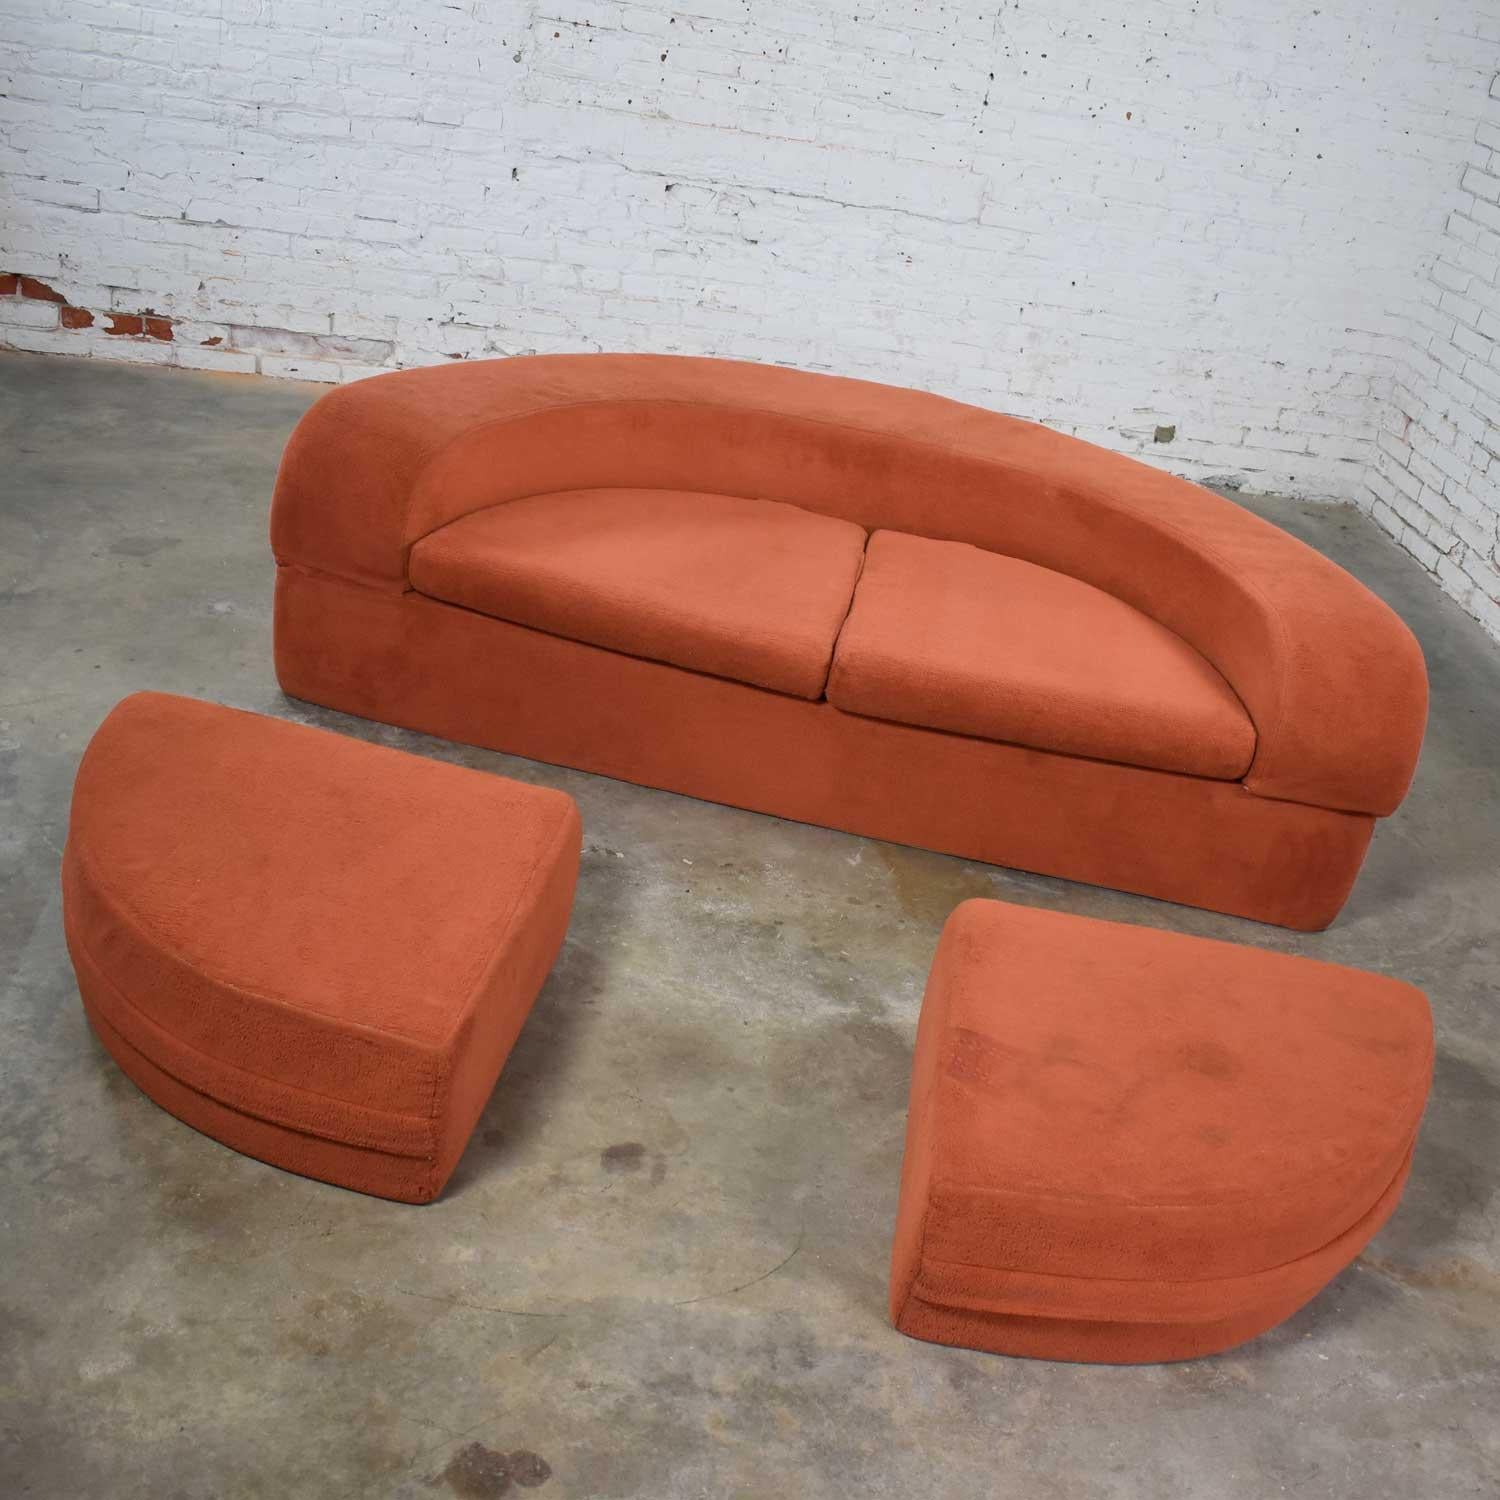 Fun and funky mod round foam sleeper sofa with ottomans in its original orange fuzzy fabric by Spherical Furniture of Boone, North Carolina. It is in good vintage condition. Its original upholstery has been professionally cleaned. Unfortunately, in